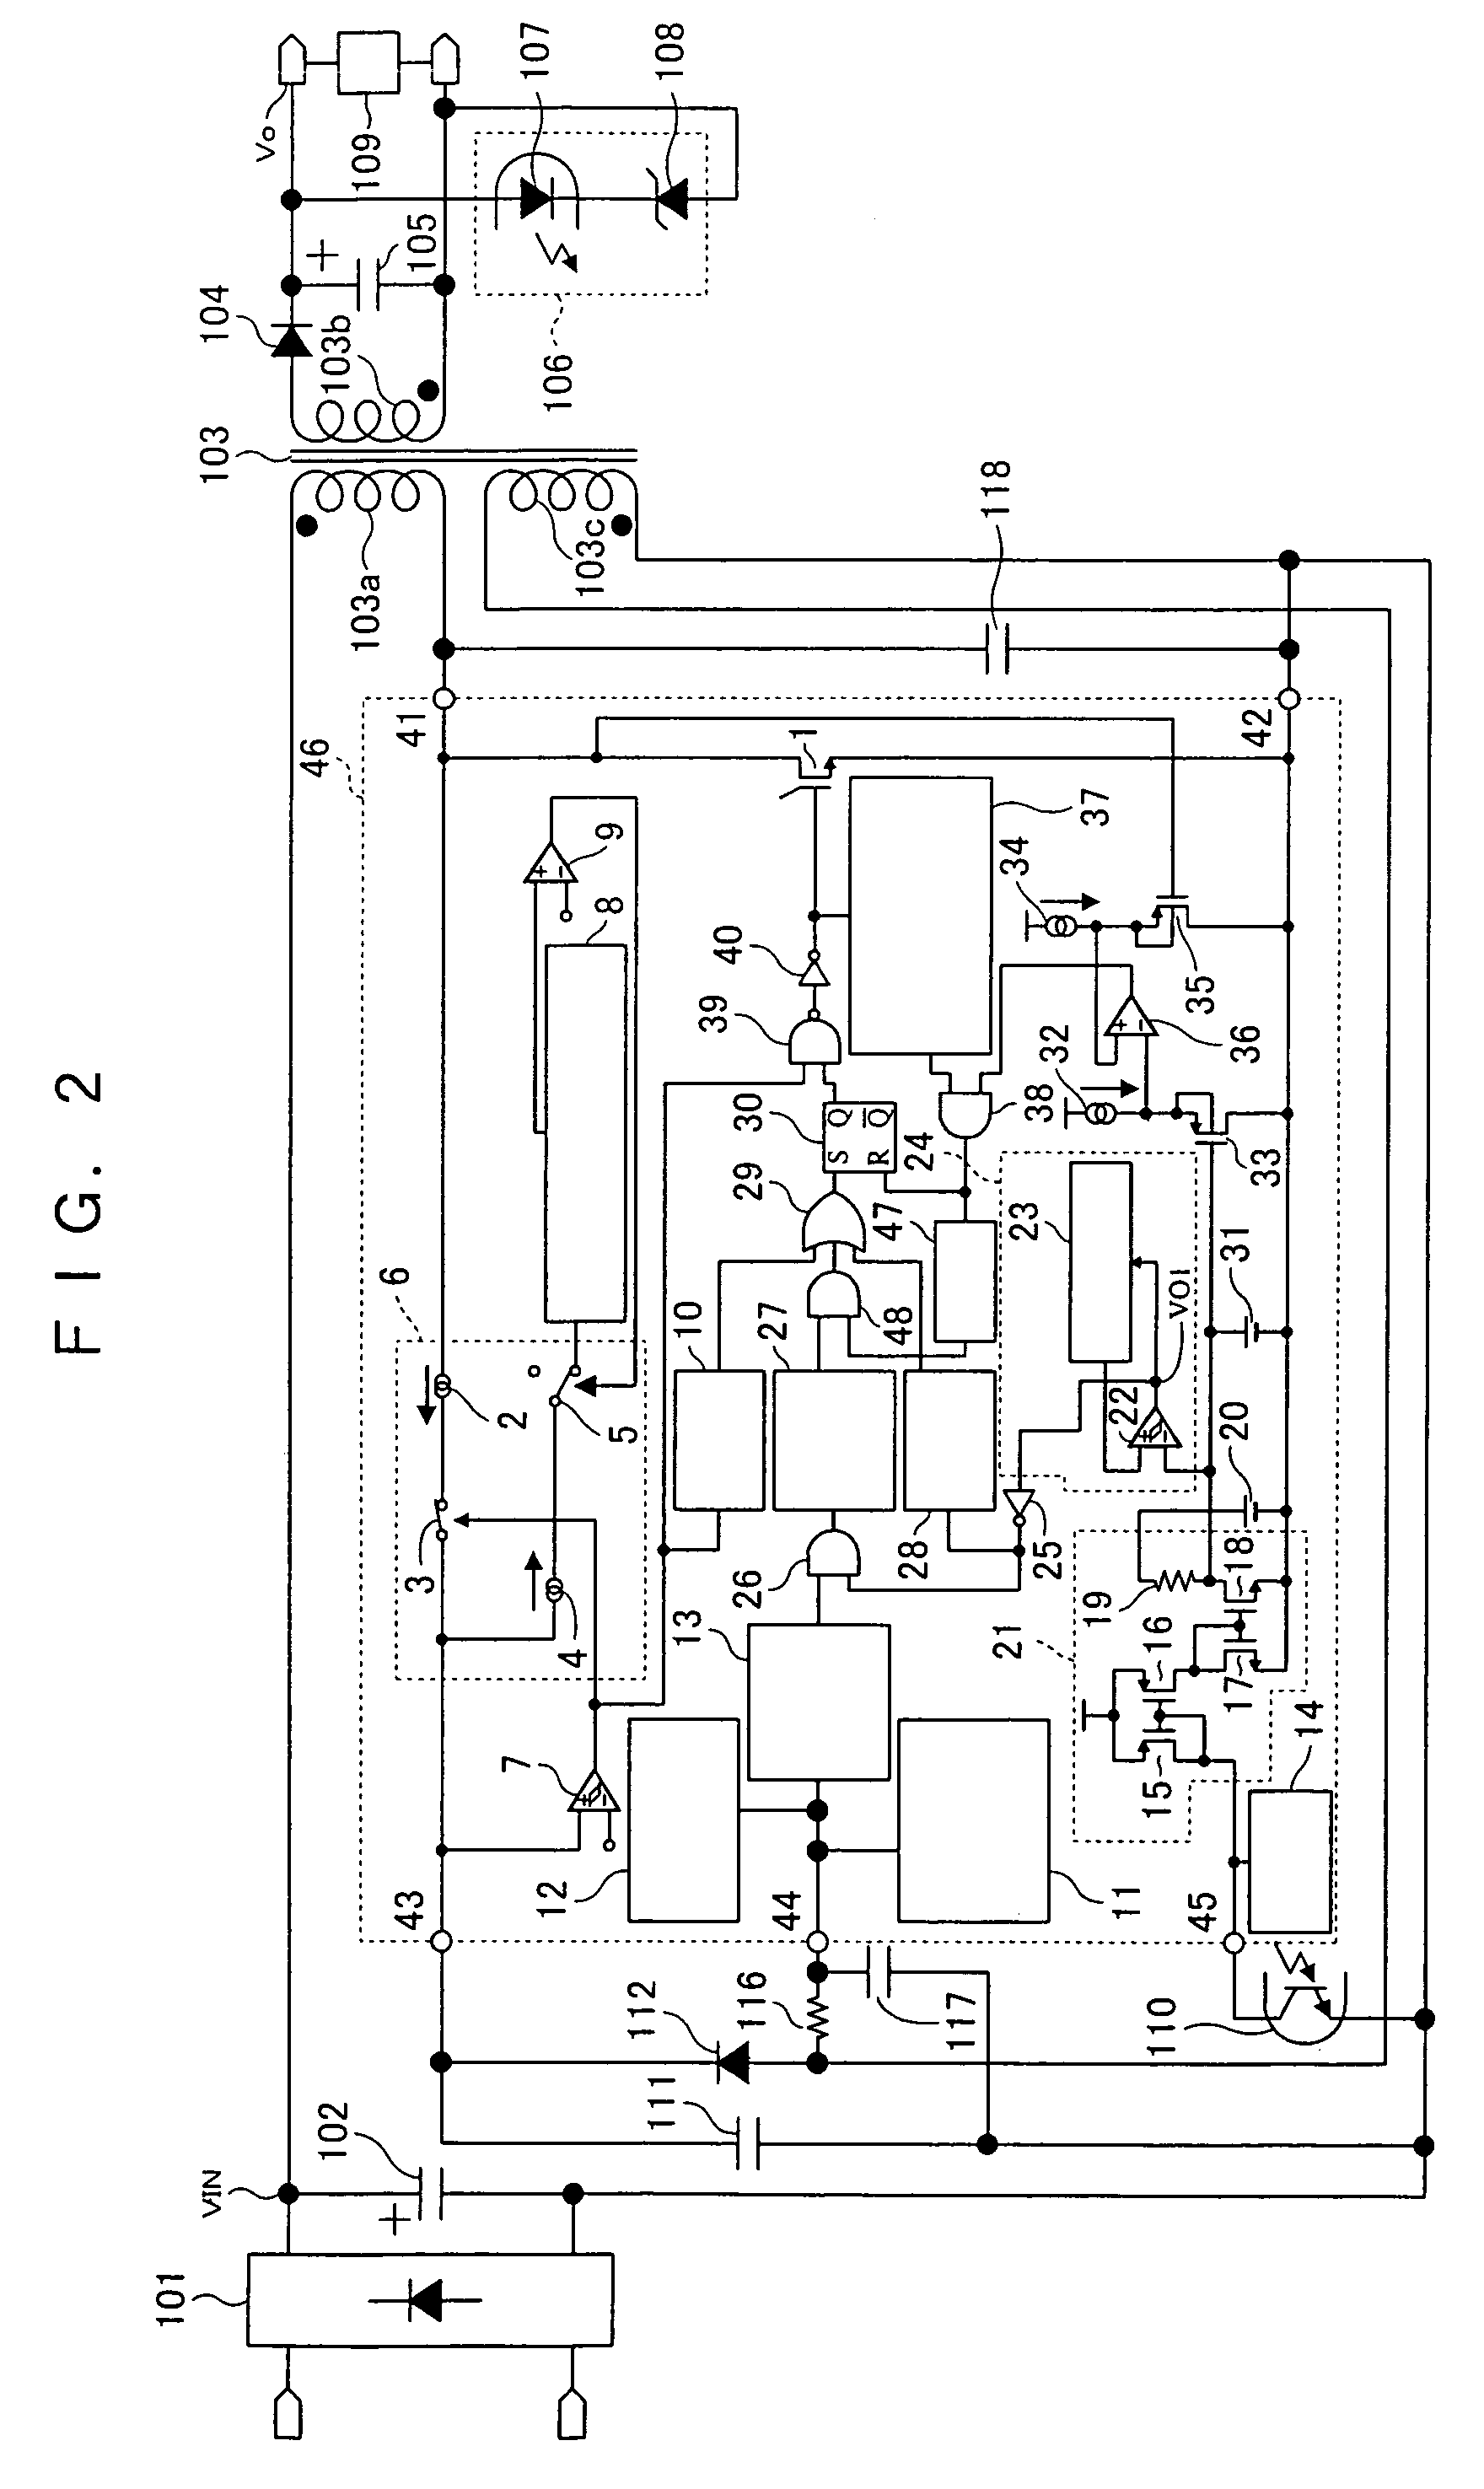 Semiconductor device for controlling switching power supply